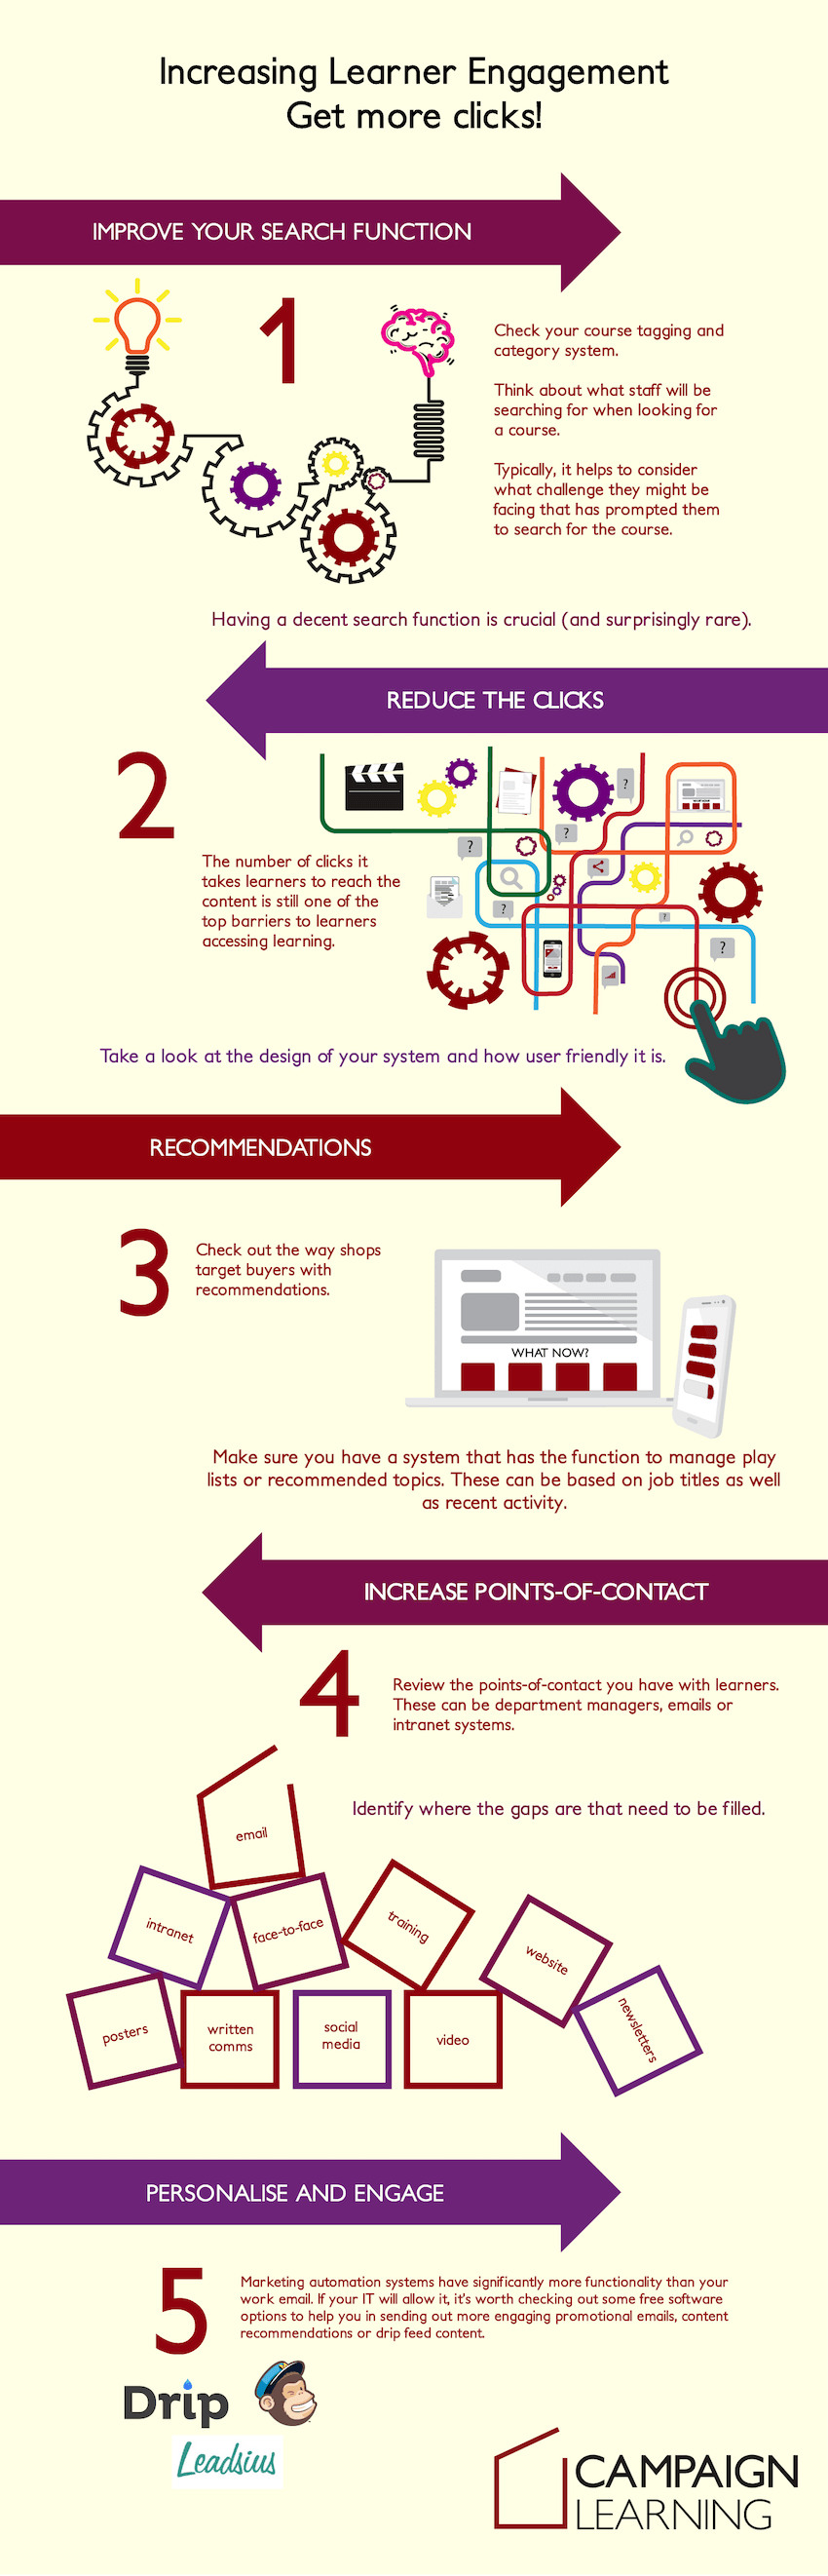 5 Ways to Get More eLearning Course Clicks Infographic